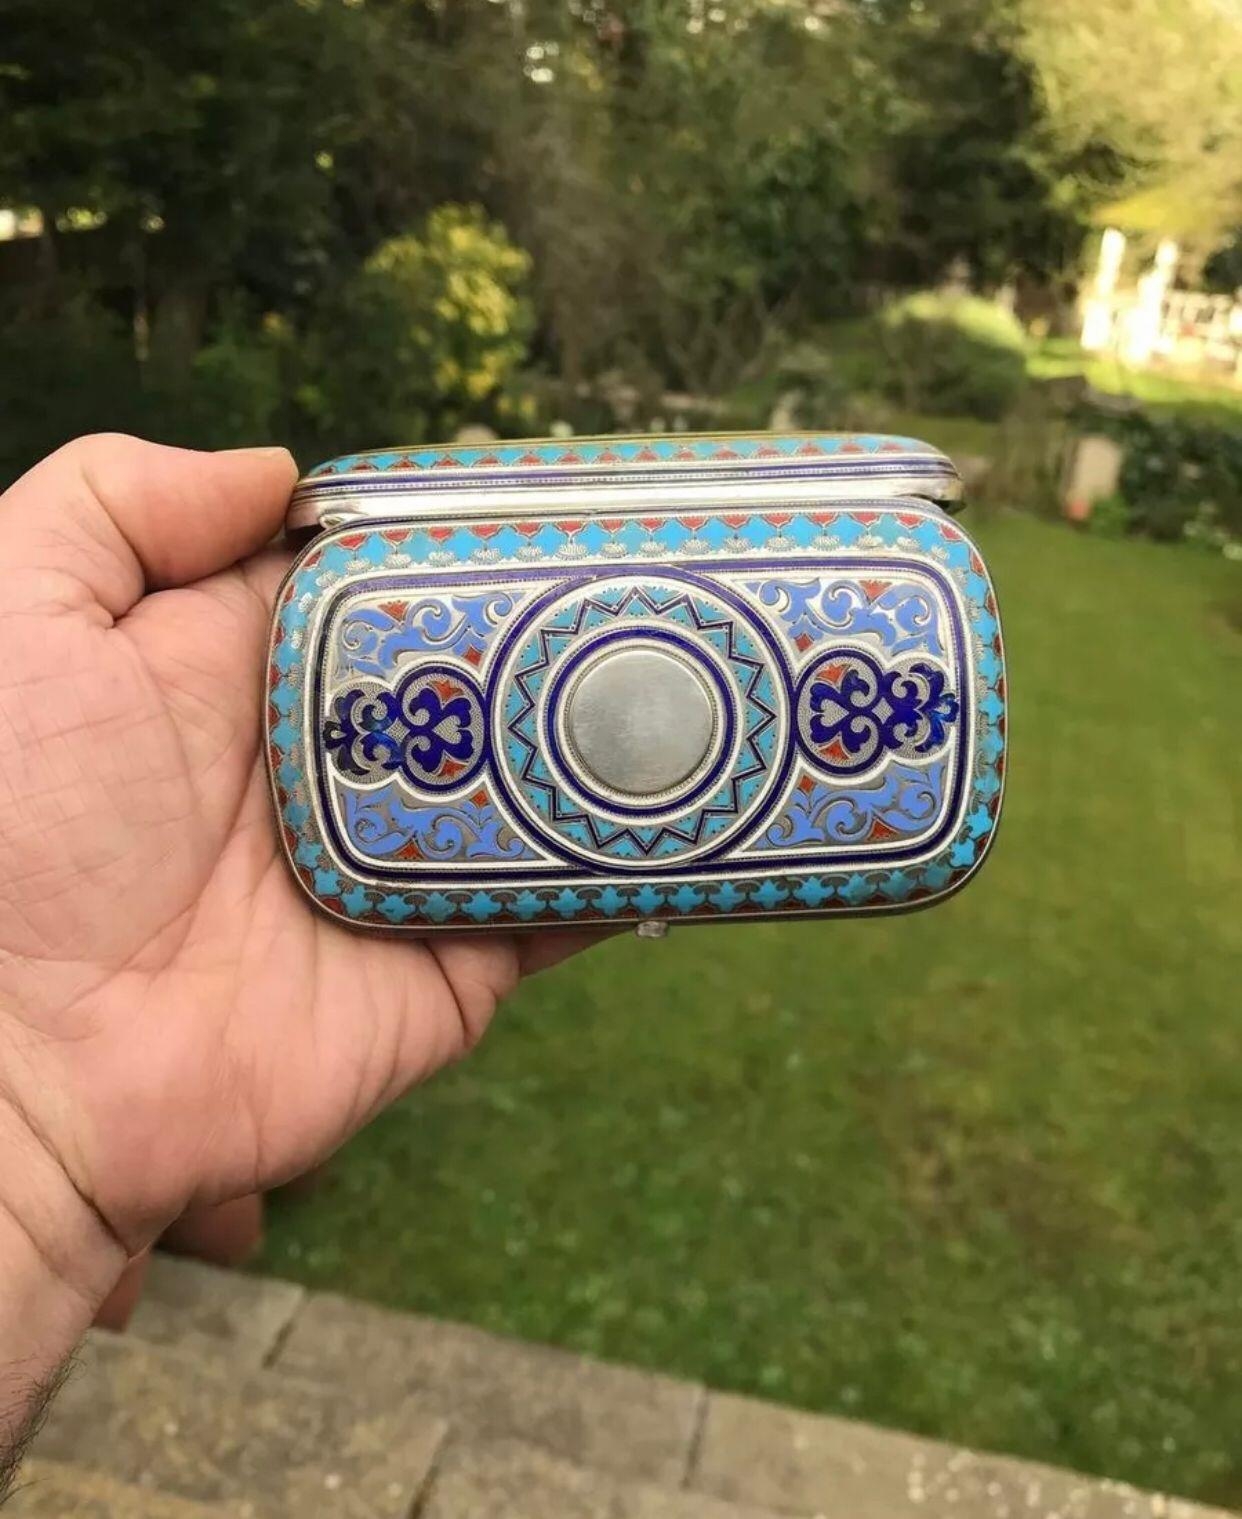 An Antique Imperial Russian Cloisonné Enamel Solid Silver Cigarette case - By well known silversmith - Image 5 of 11